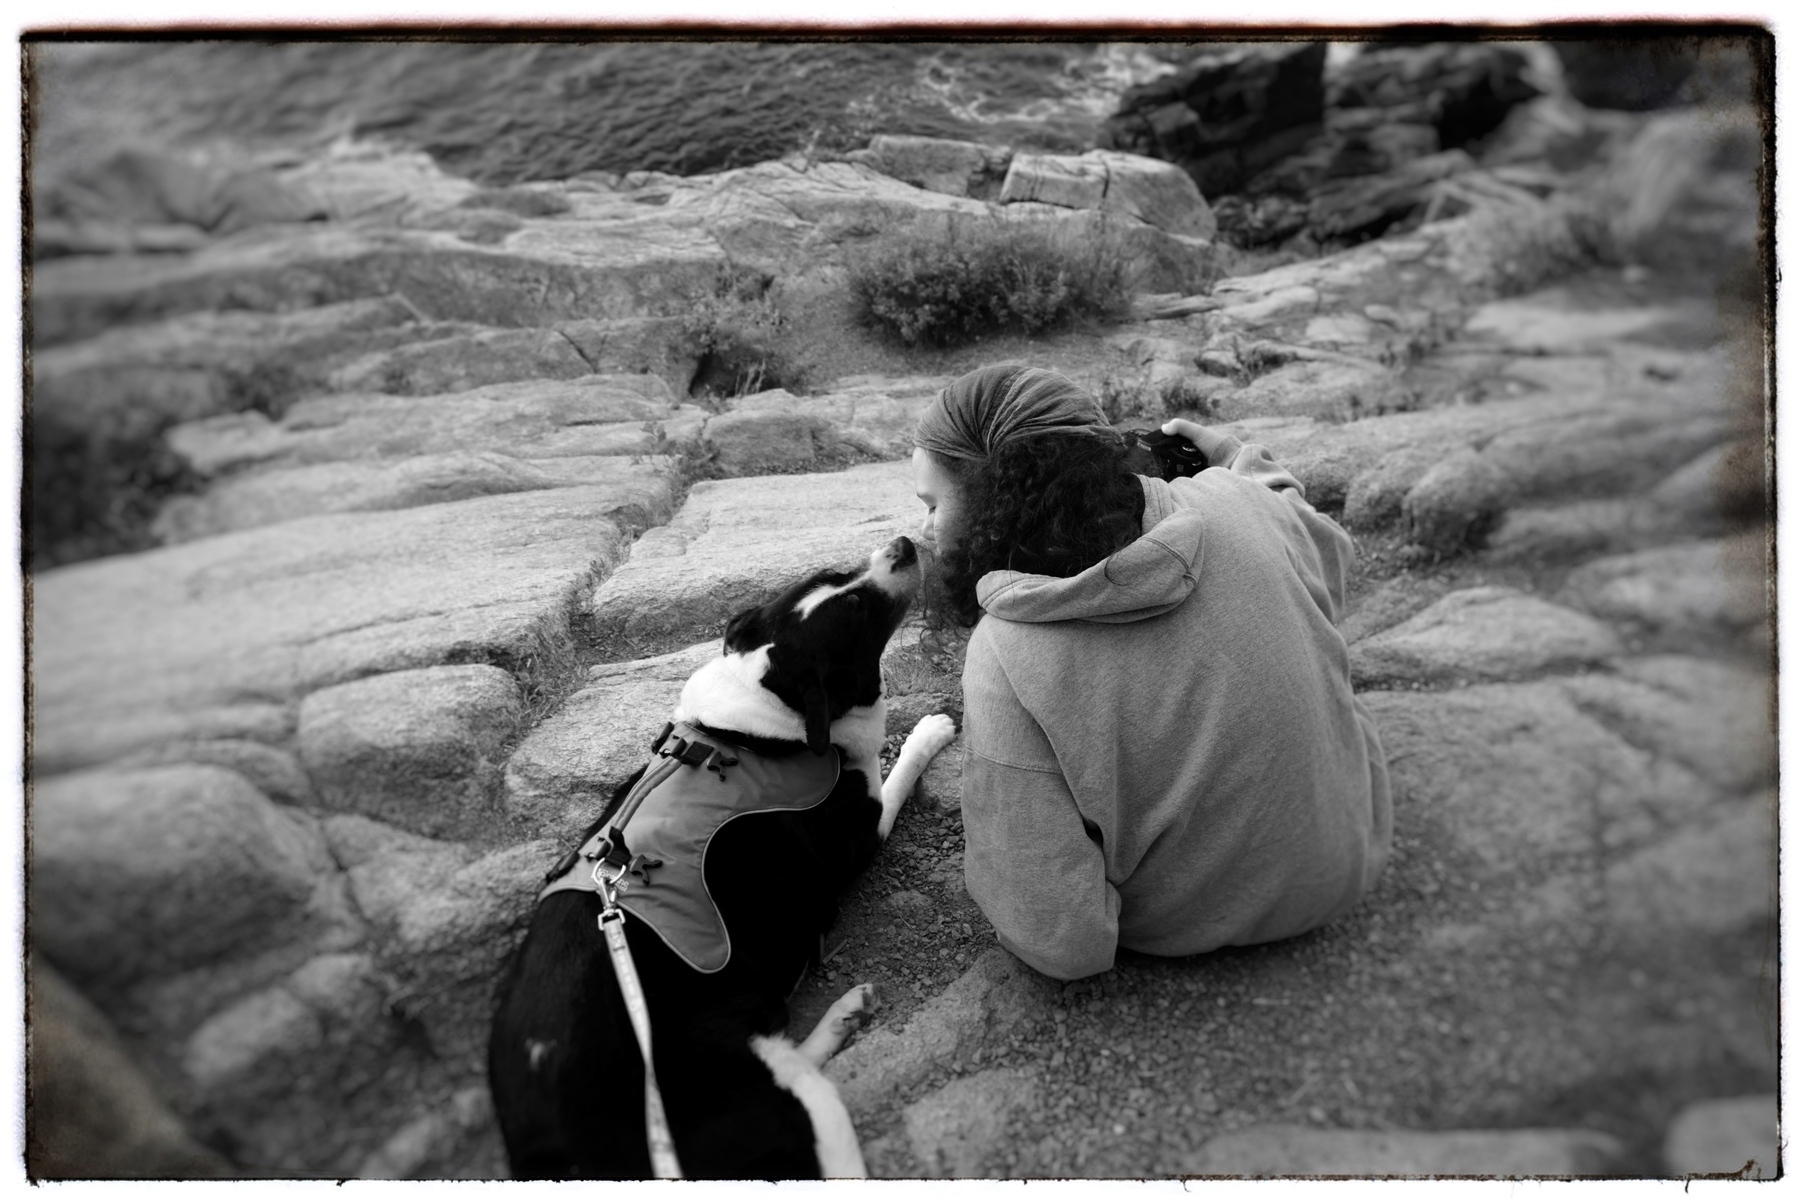 A black and white photo of a girl on the right appearing to kiss her black and white dog on the left. They are sitting on a rocky outcropping with waves crashing below.